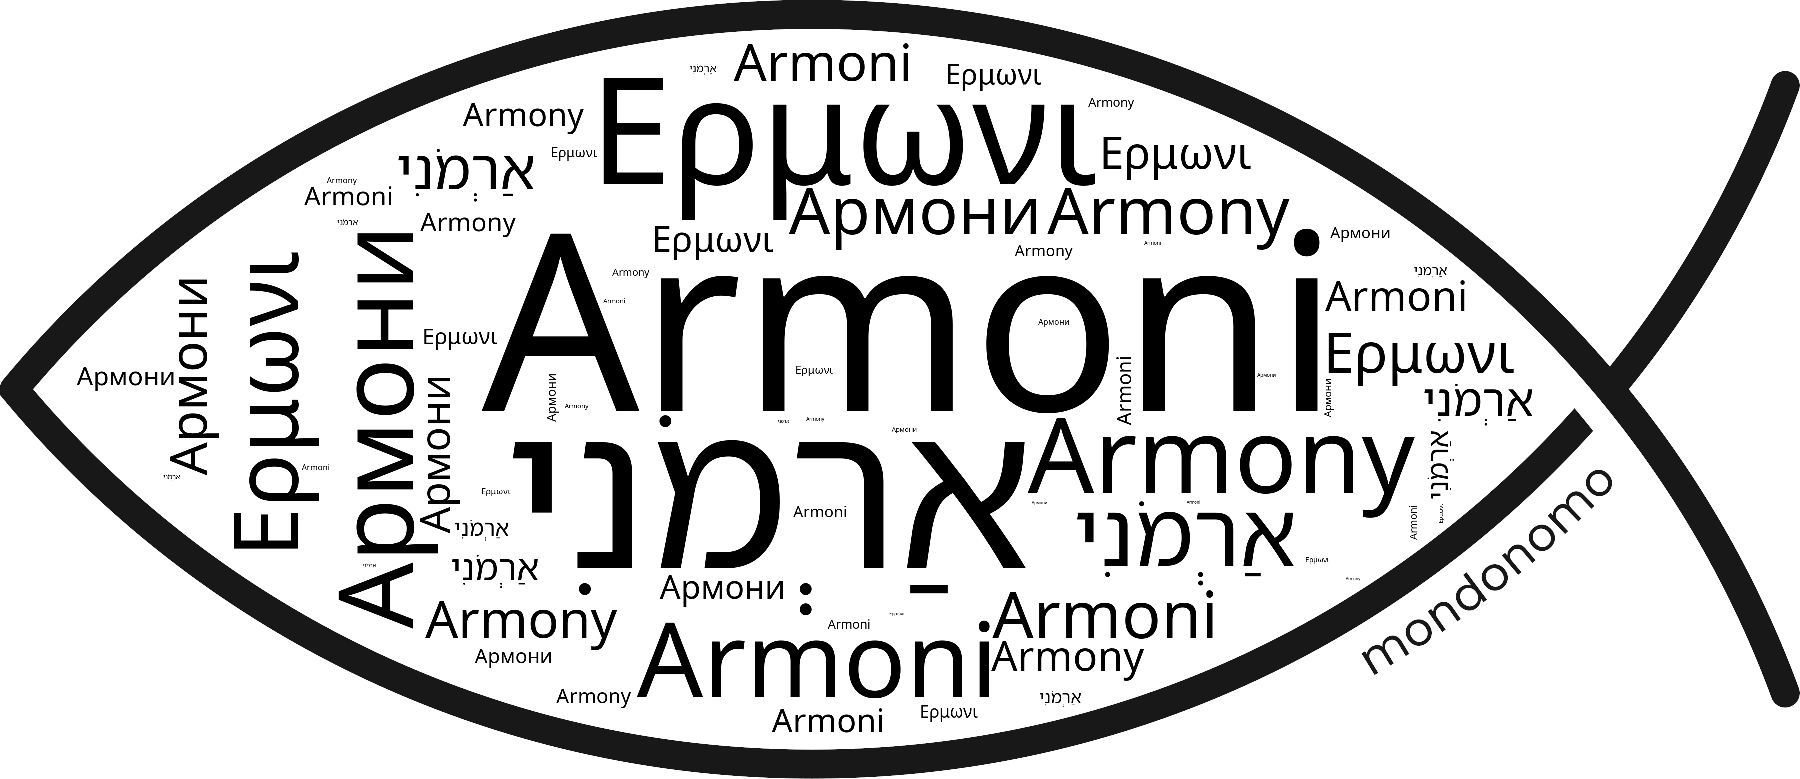 Name Armoni in the world's Bibles